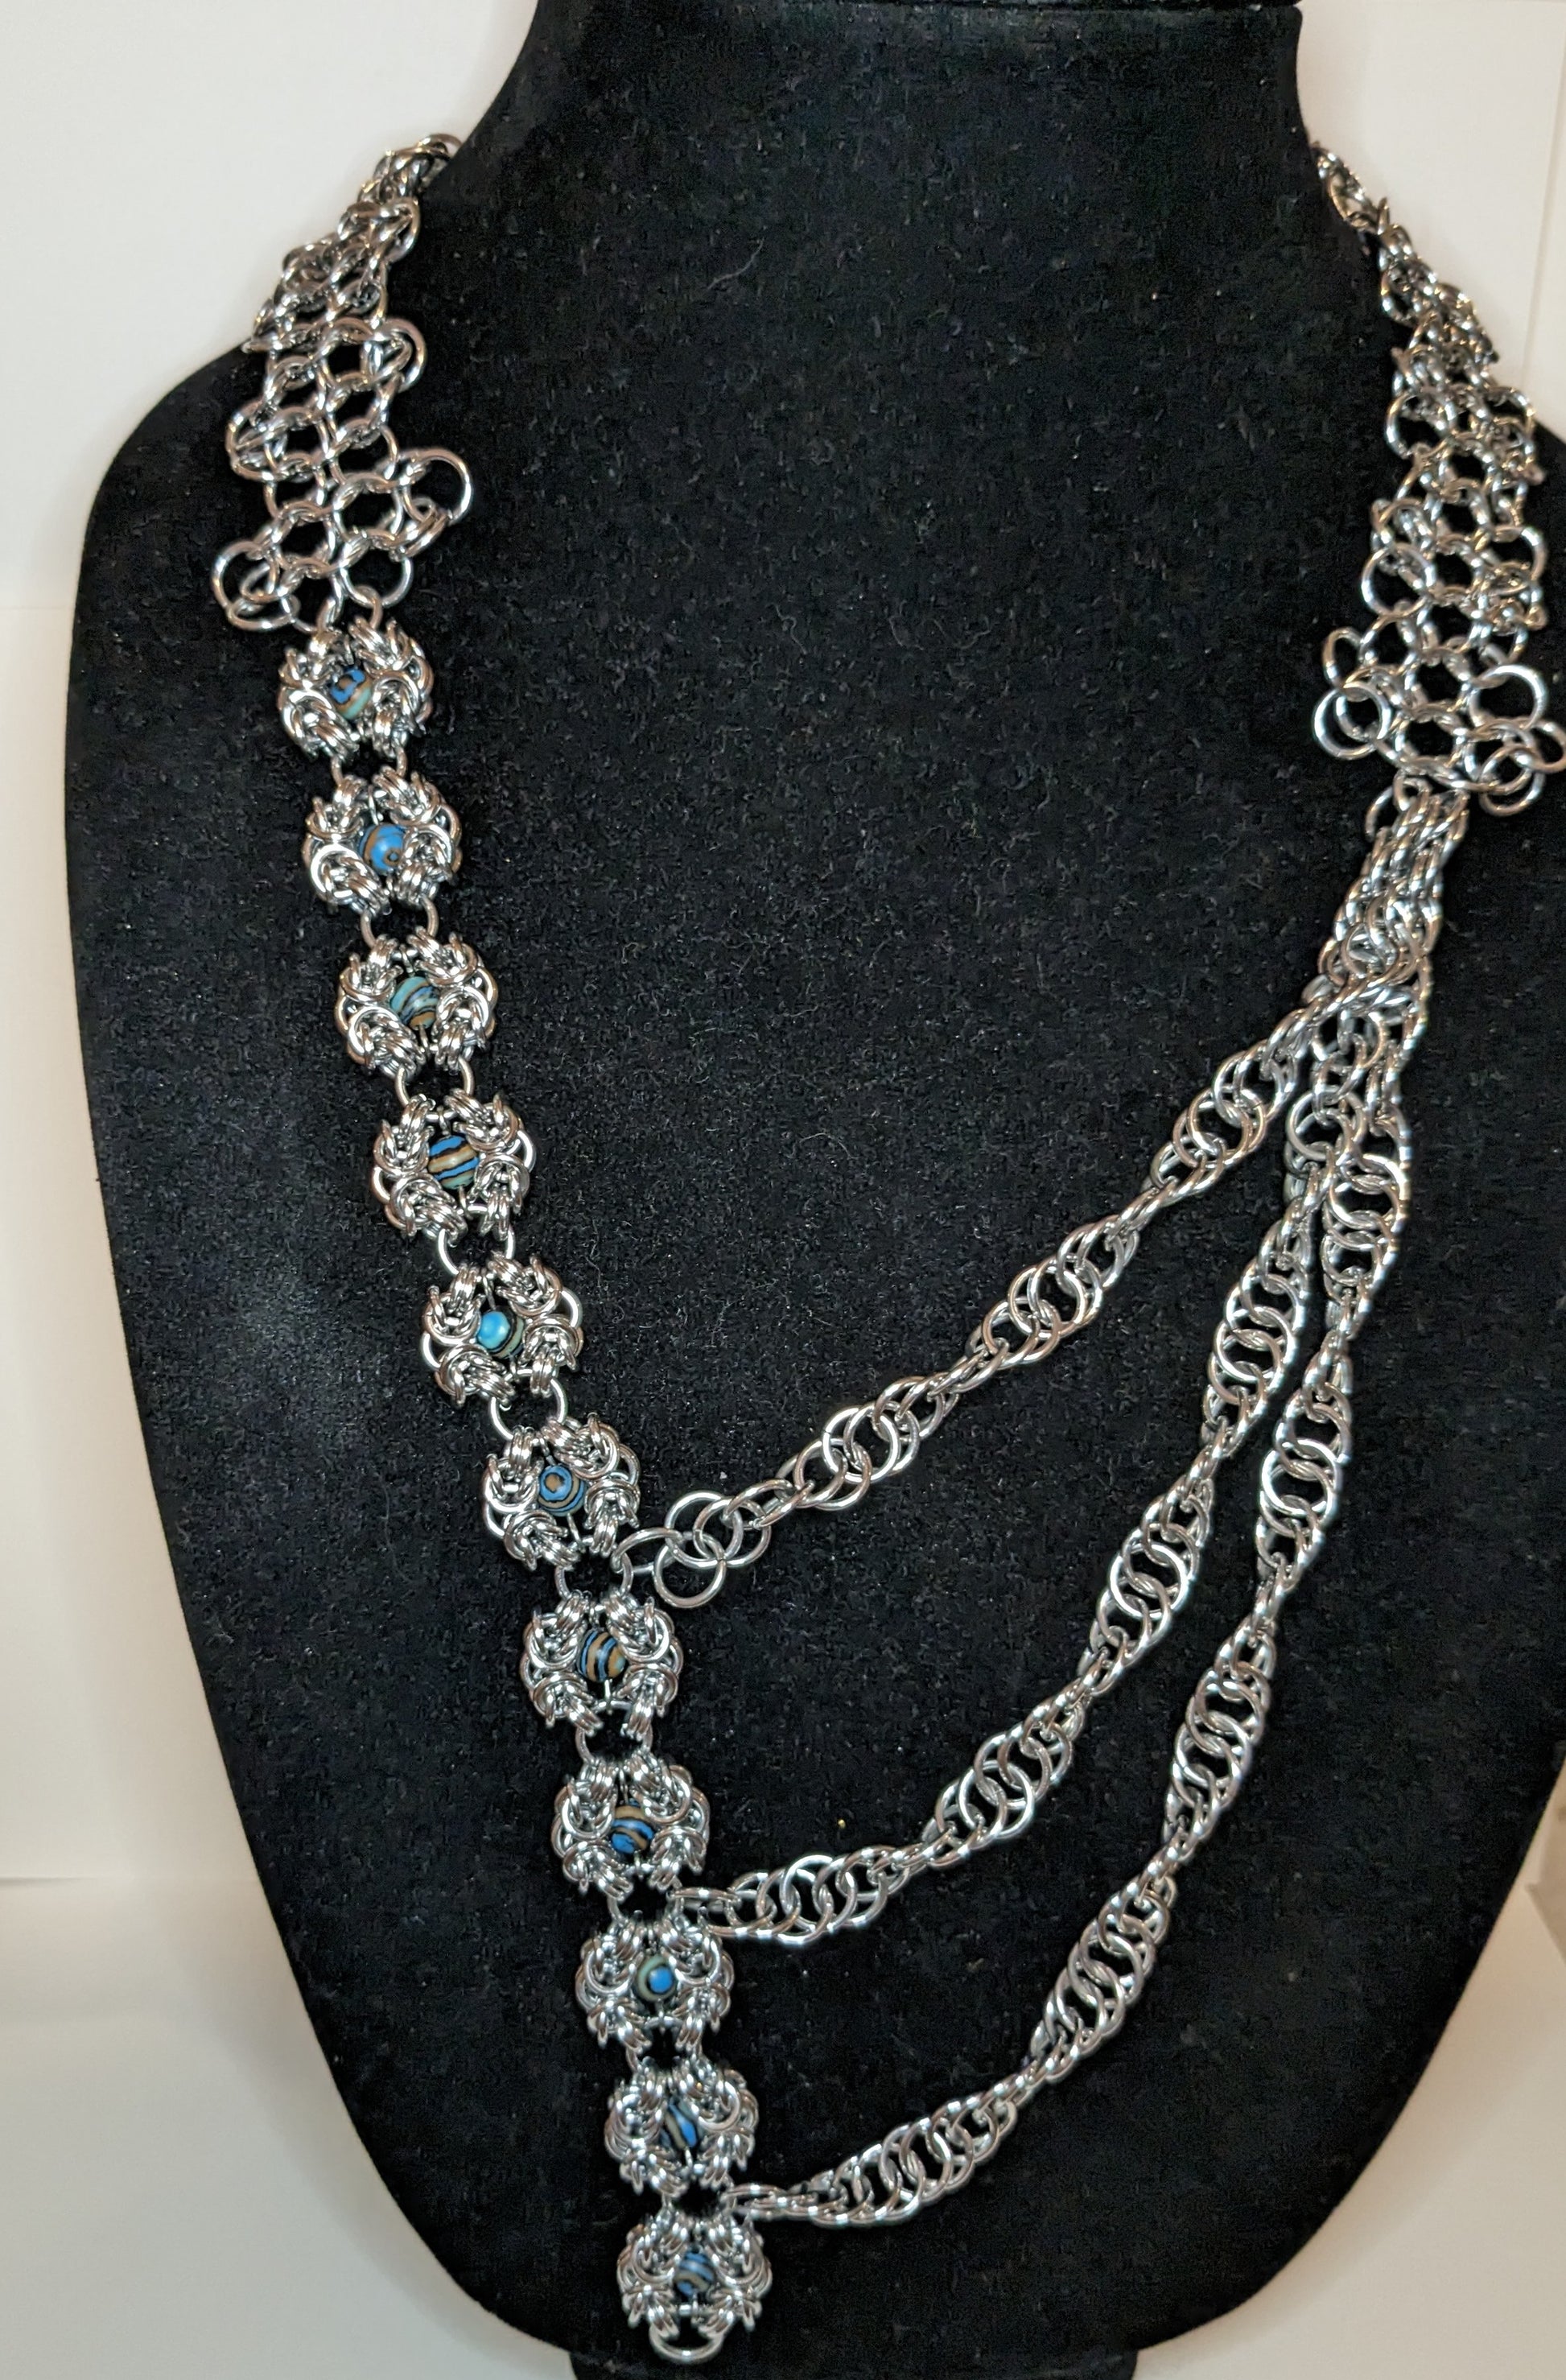 Asymmetric chainmail necklace on a black bust.  Left side is modified Romanov weave flowers with gemstone beads and the right side are three chainmail strands that cross the front to look like a mult-strand necklace.  